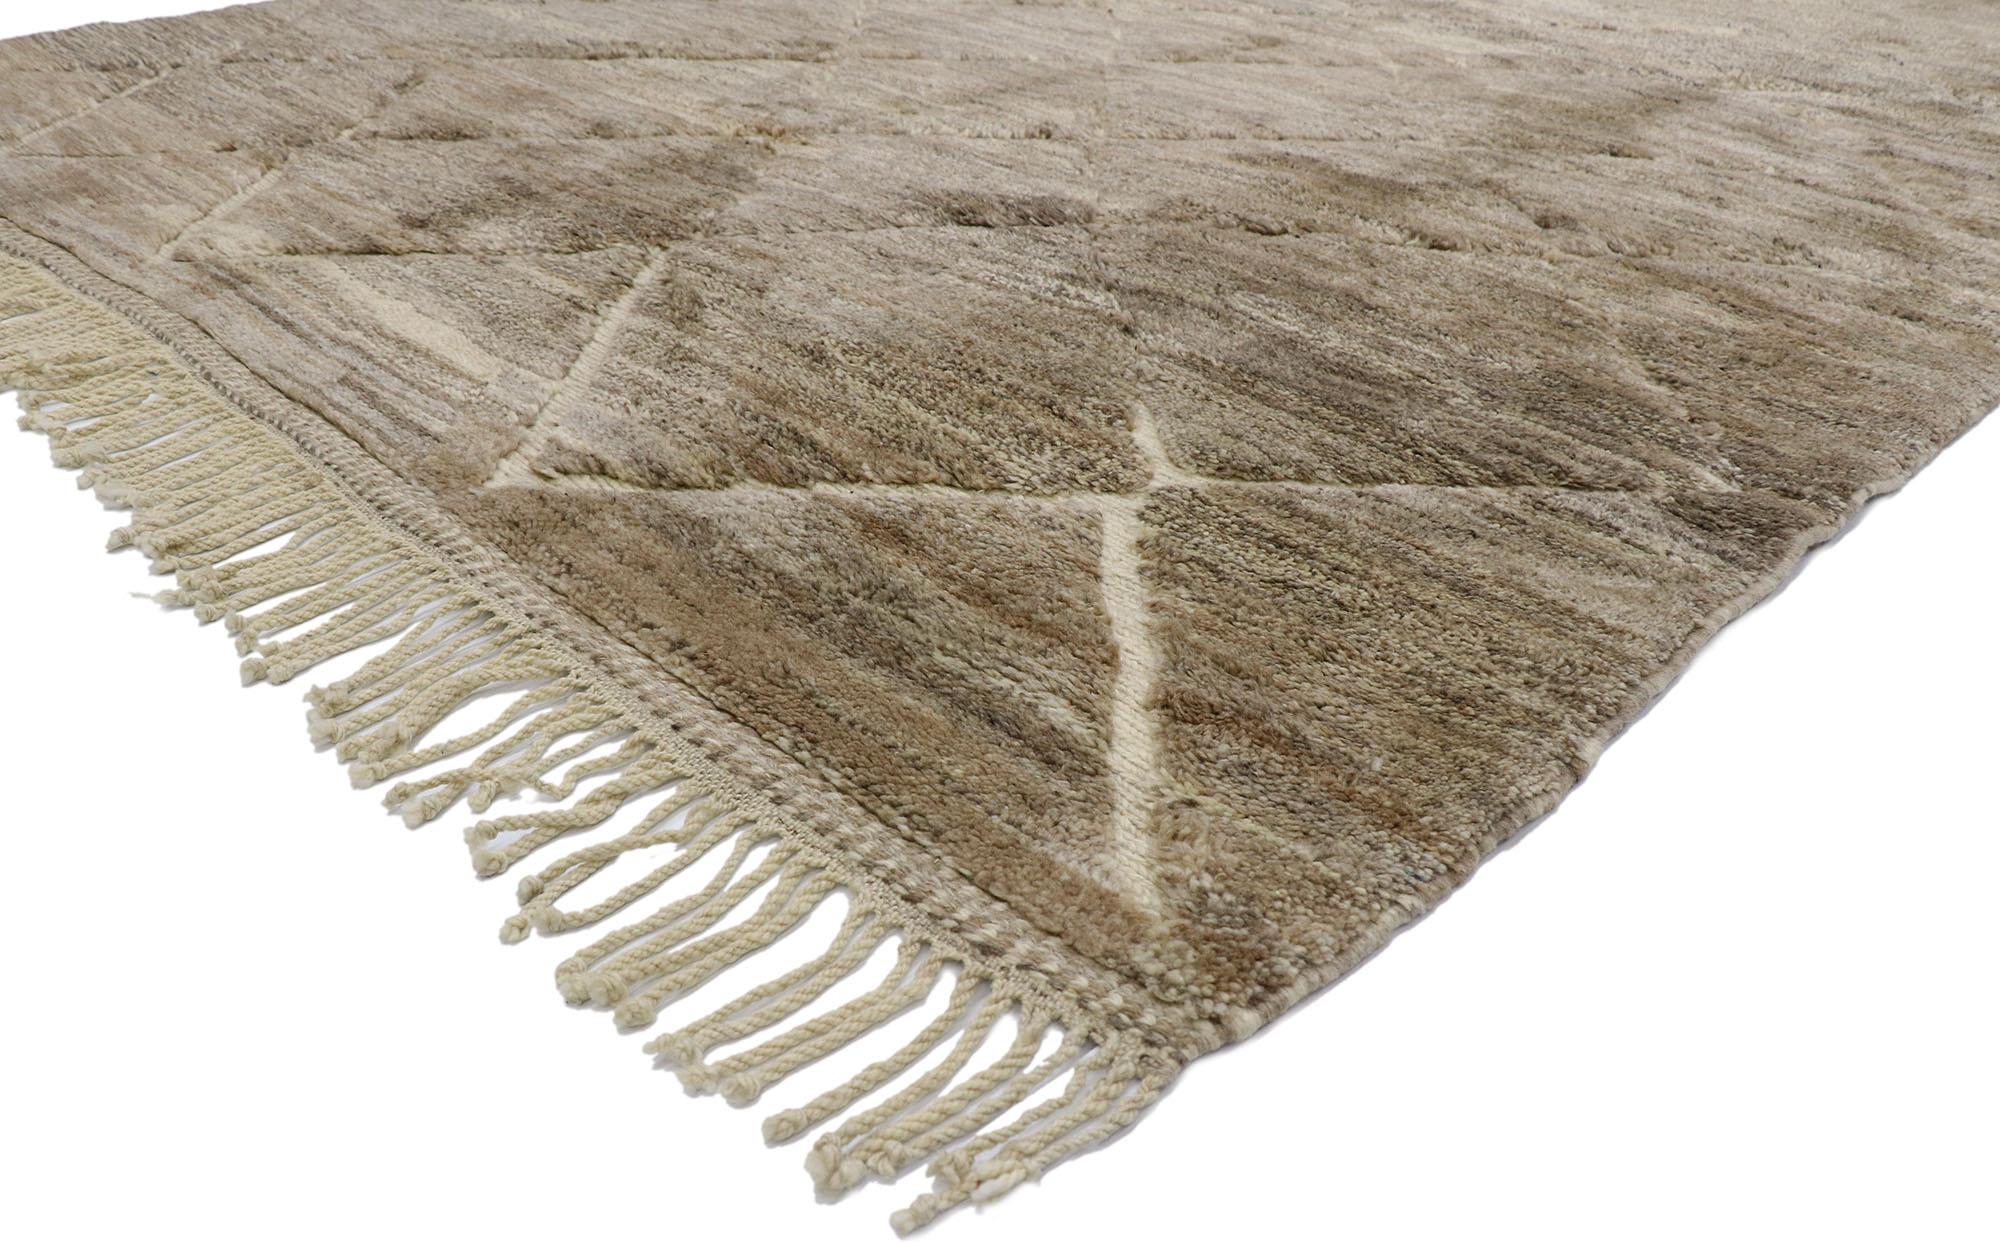 21182 New Contemporary Berber Moroccan rug with Organic Modern Style 08'06 x 11'05. With its simplicity, plush pile and Hygge vibes, this hand knotted wool contemporary Berber Moroccan rug provides a feeling of cozy contentment without the clutter.